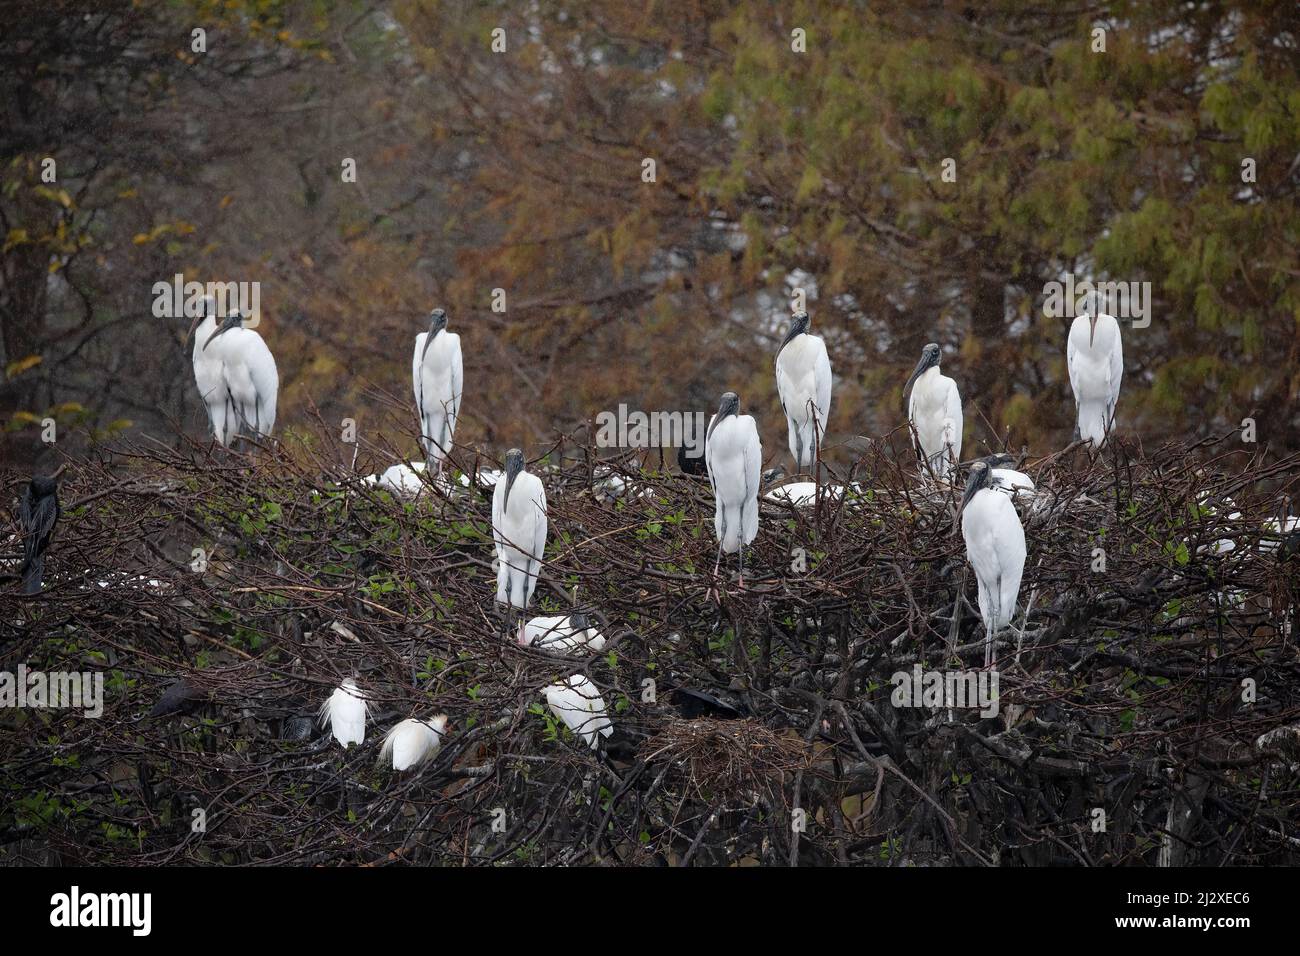 A group of wood storks stand on top of their nesting tree in the Florida Everglades. Stock Photo